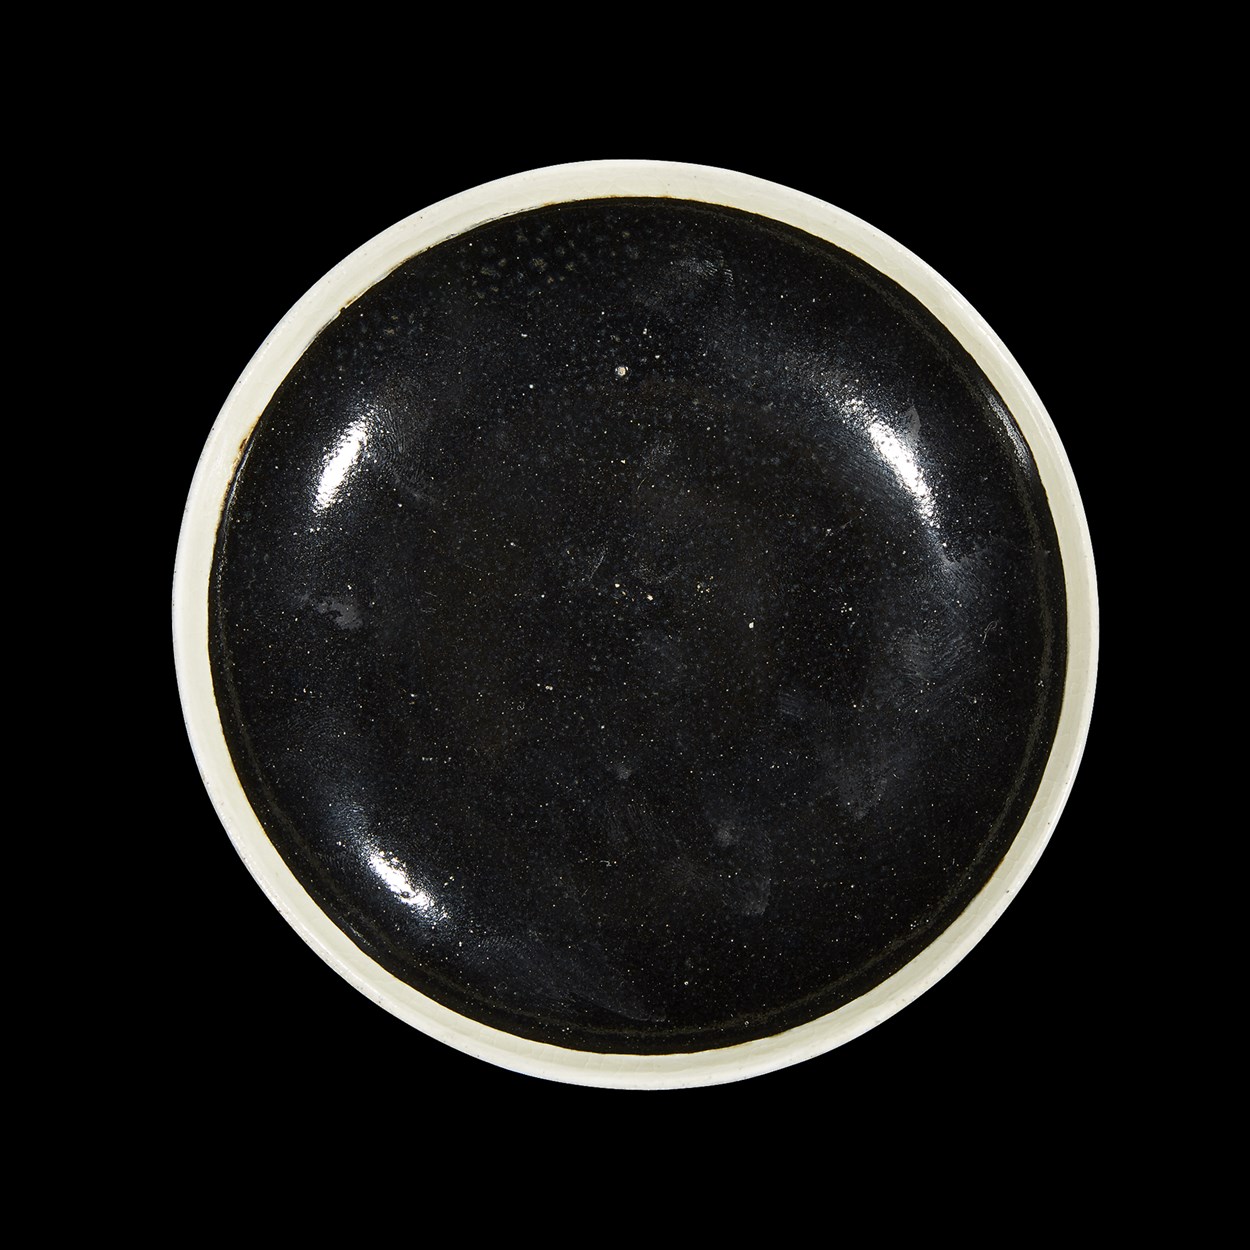 Lot 152 - A Chinese small black-glazed dish with white slip rim